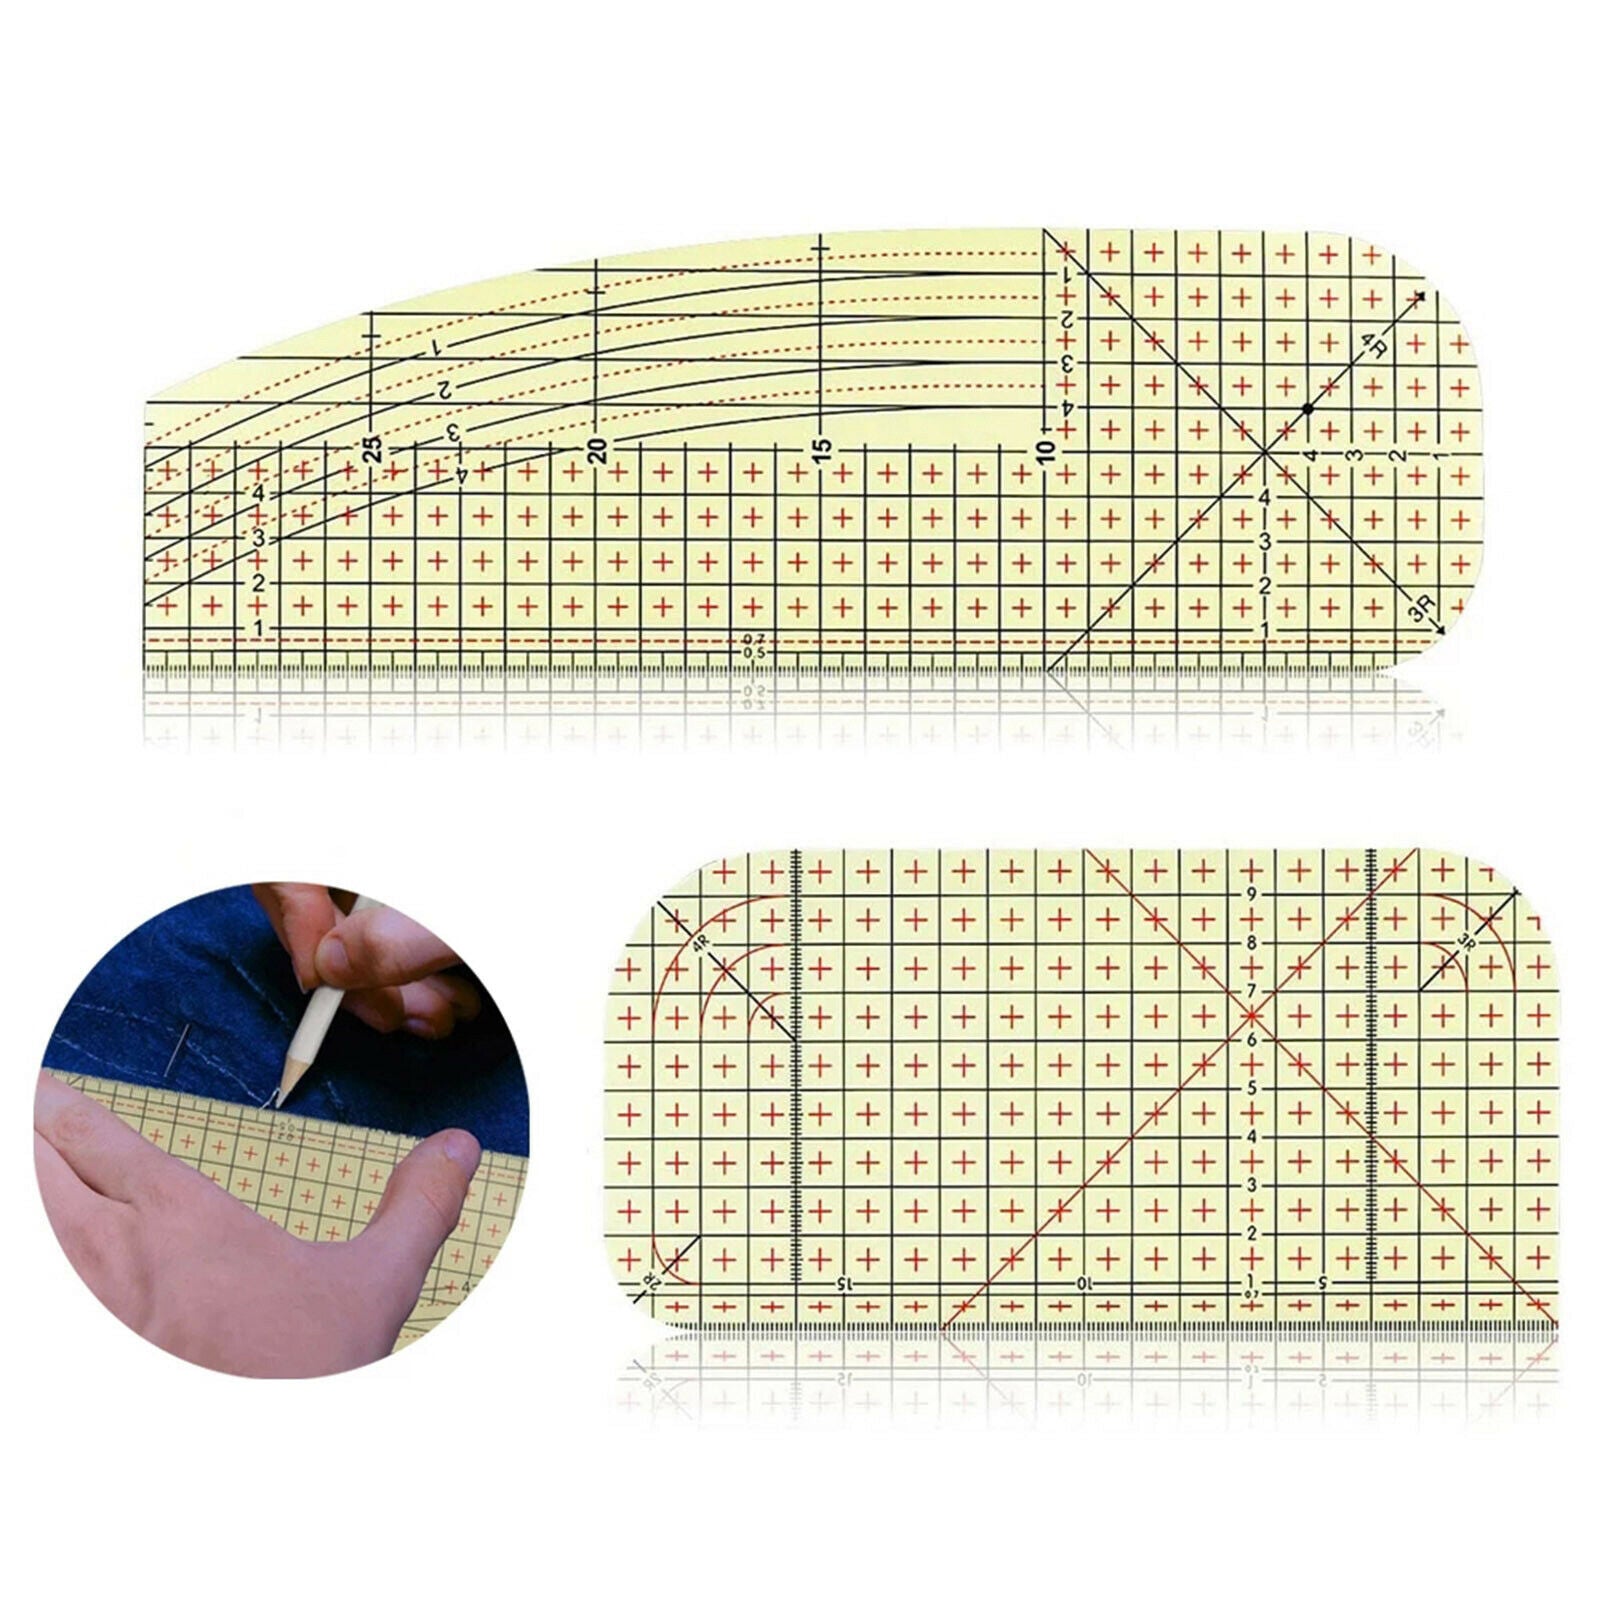 2x Hot Ironing Ruler Patchwork Clothes Fabric Crafts DIY Sewing Measuring Hands